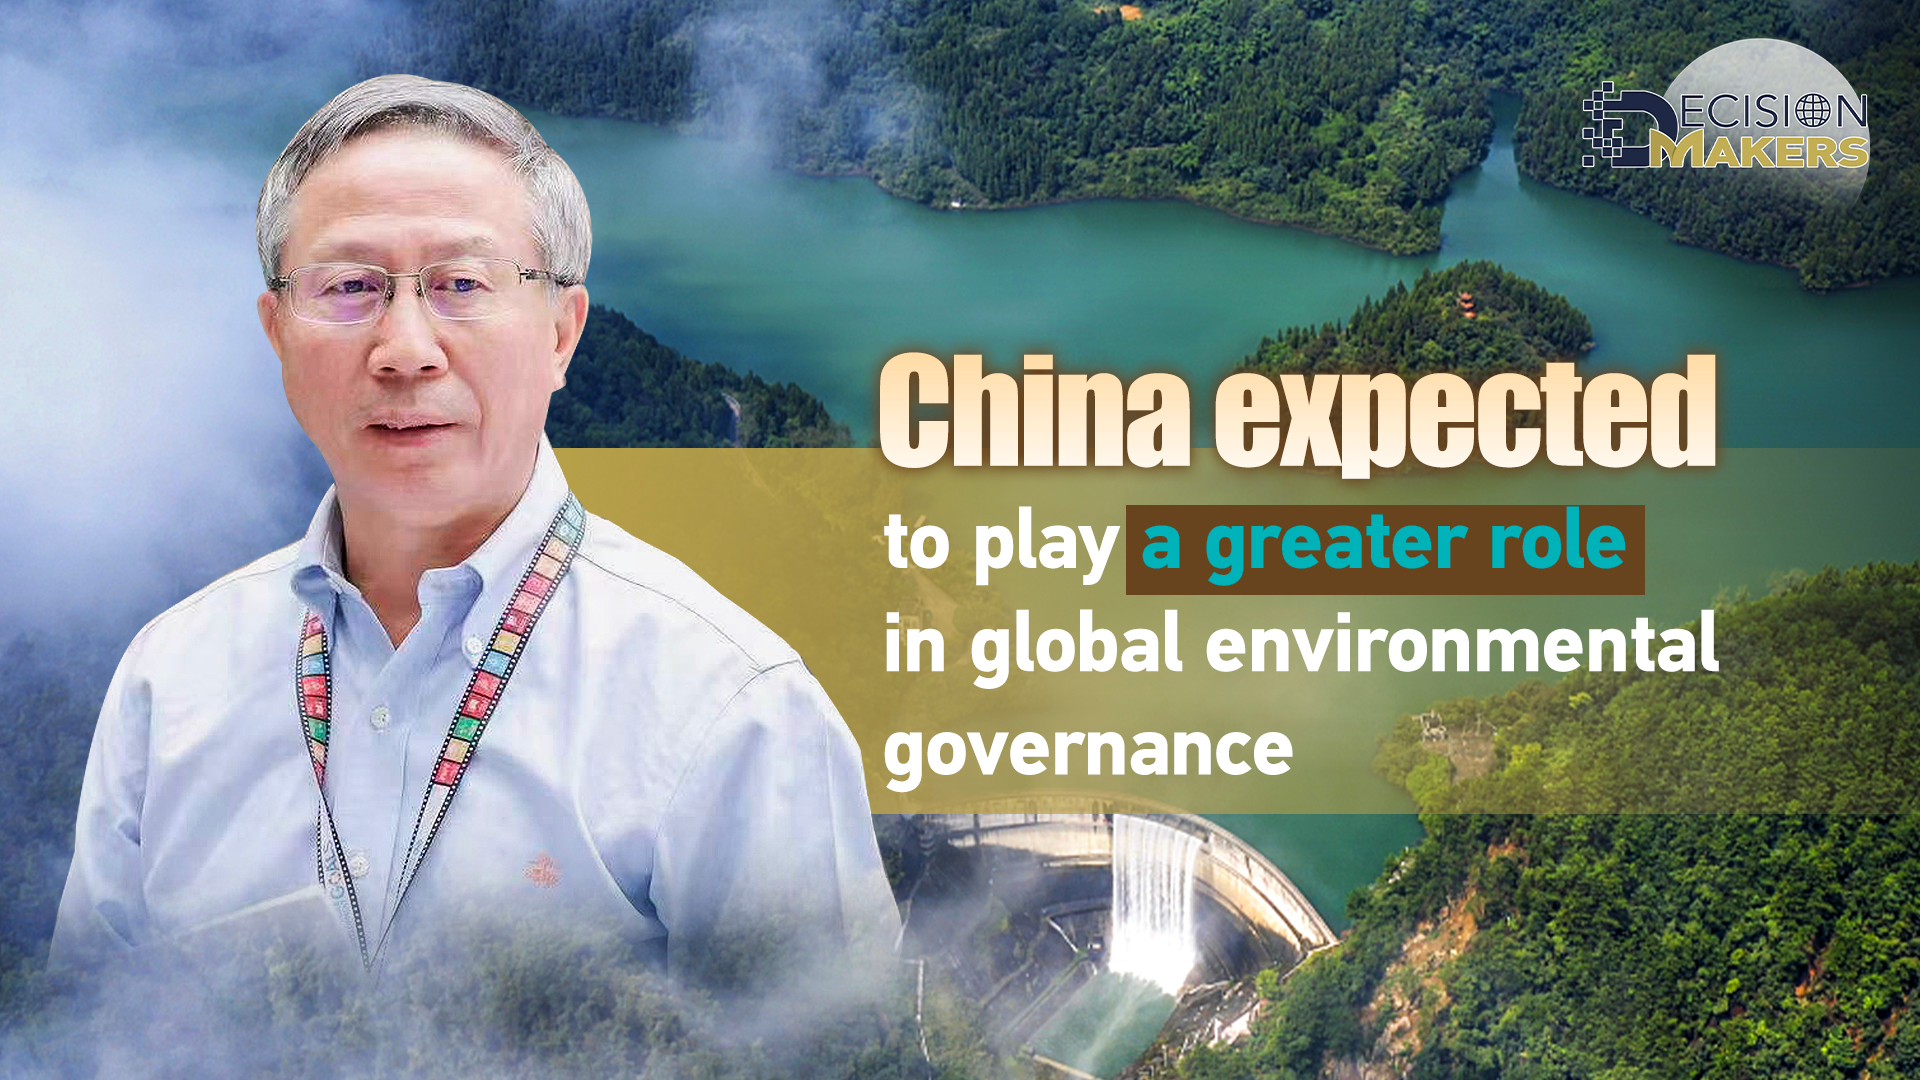 China expected to play a greater role in global environmental governance